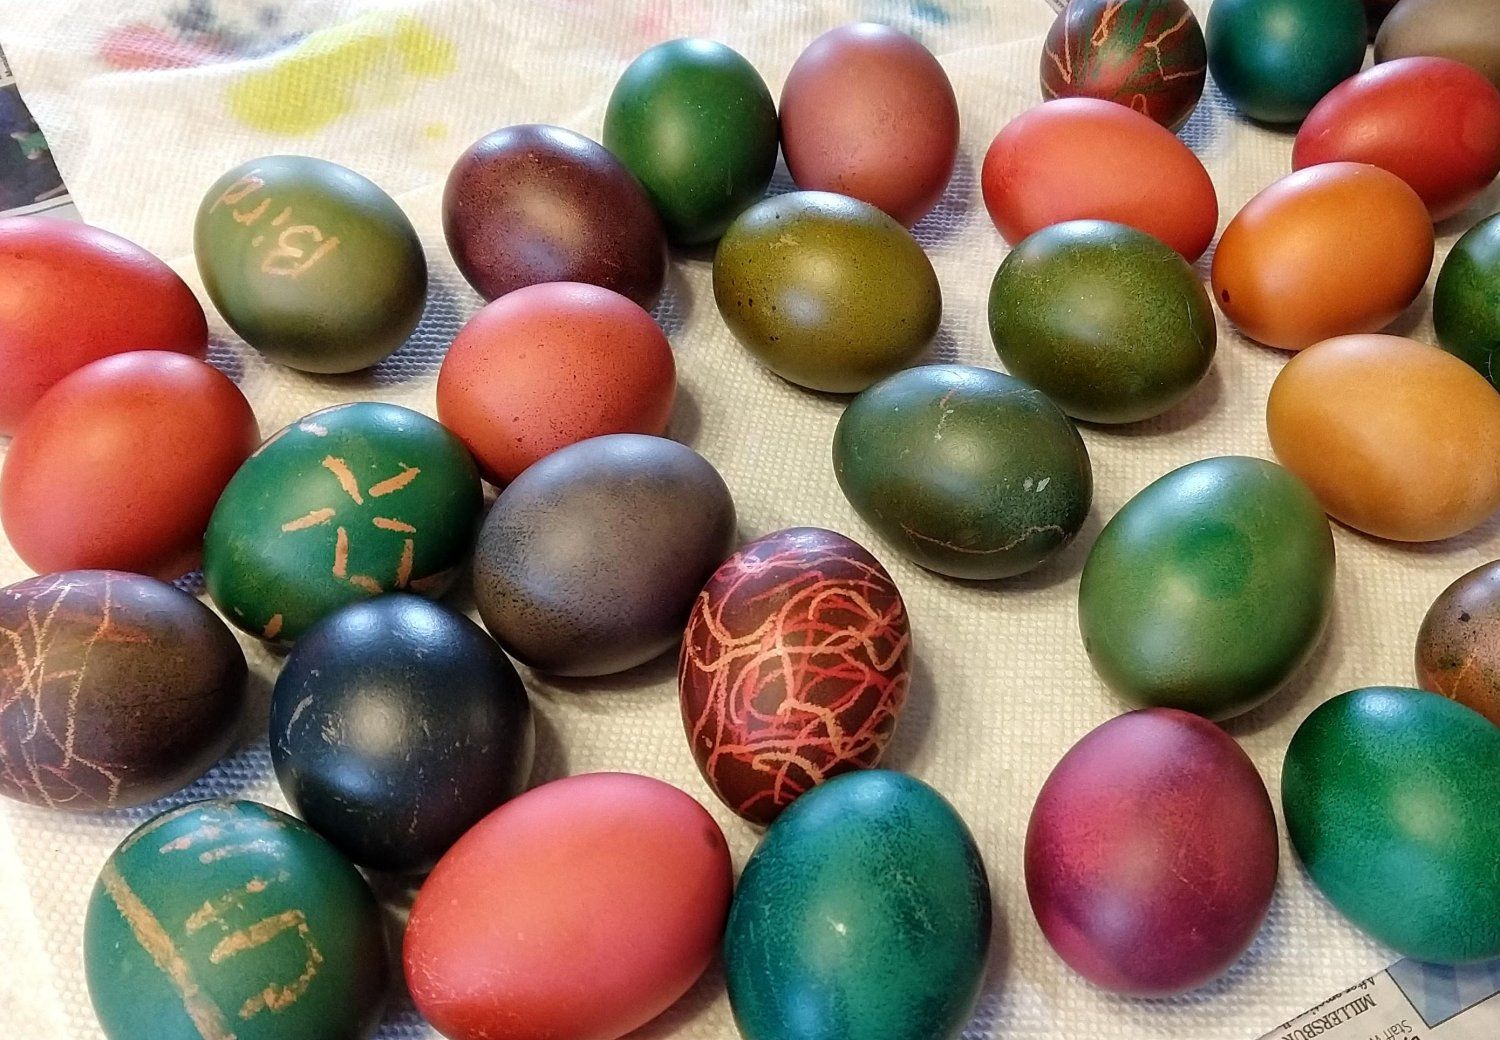 Previous Happening: Happy Easter!